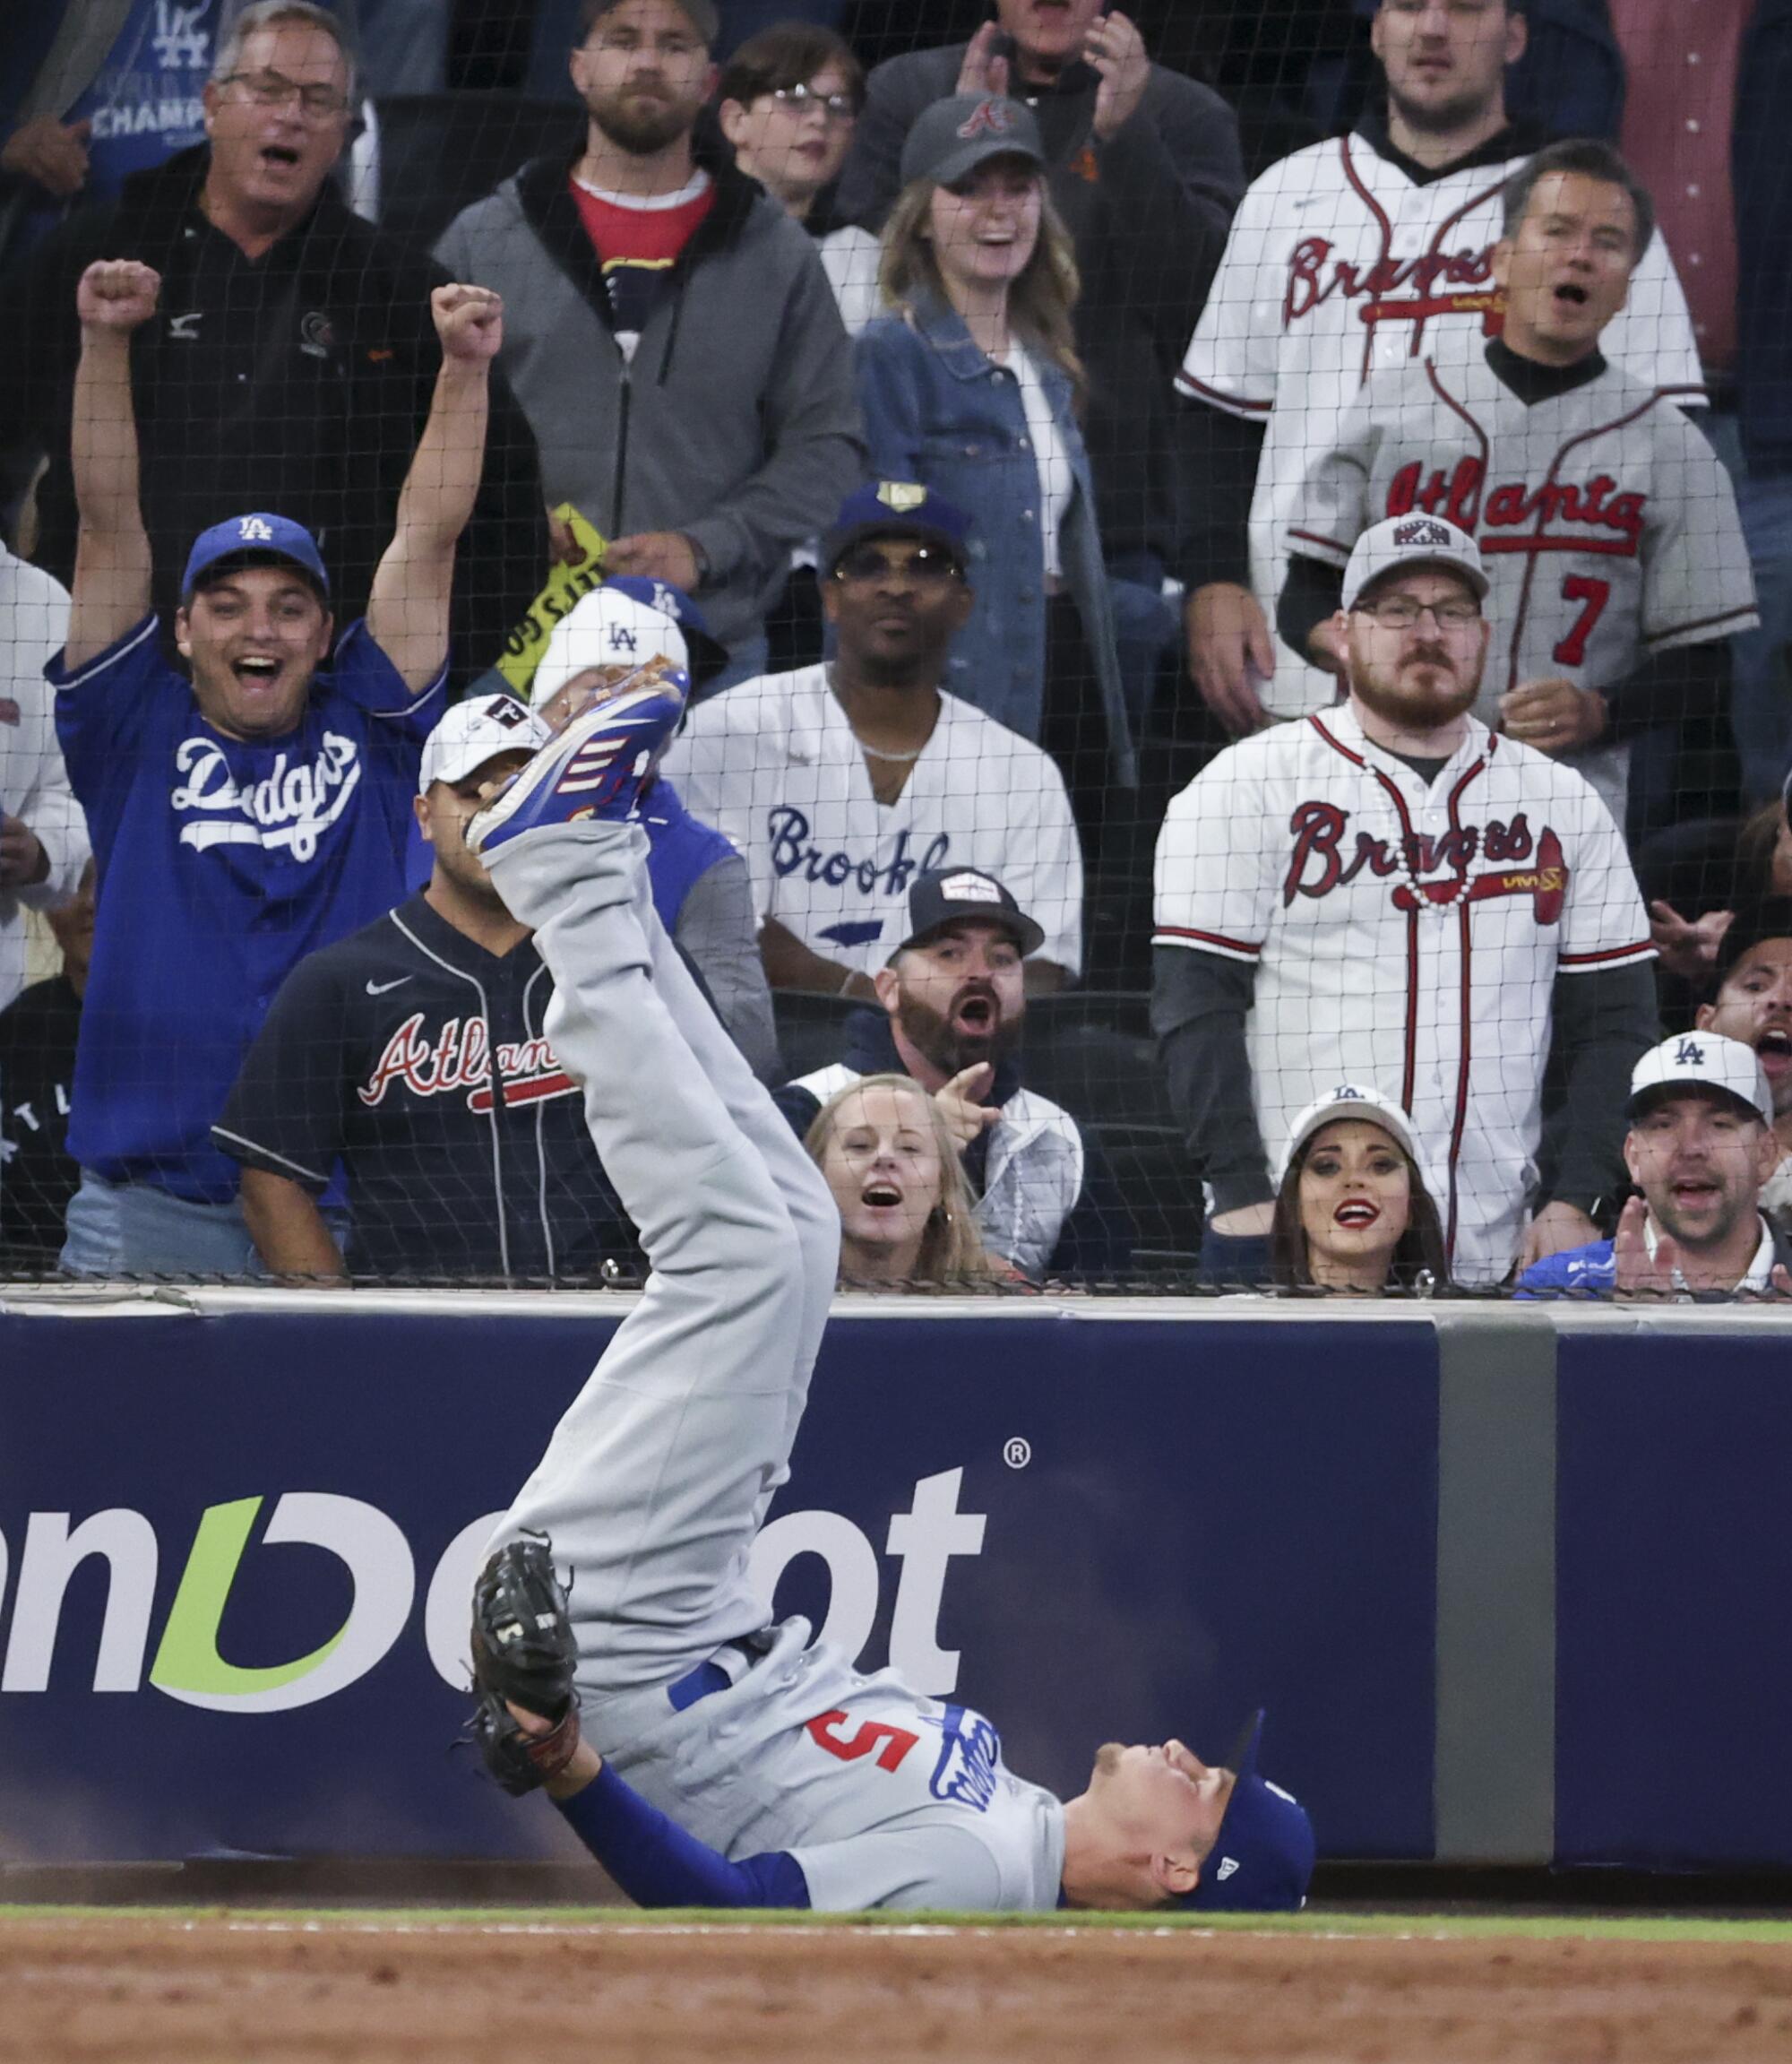 Dodgers shortstop Corey Seager falls after catching a pop up fly by Braves' Joc Pederson